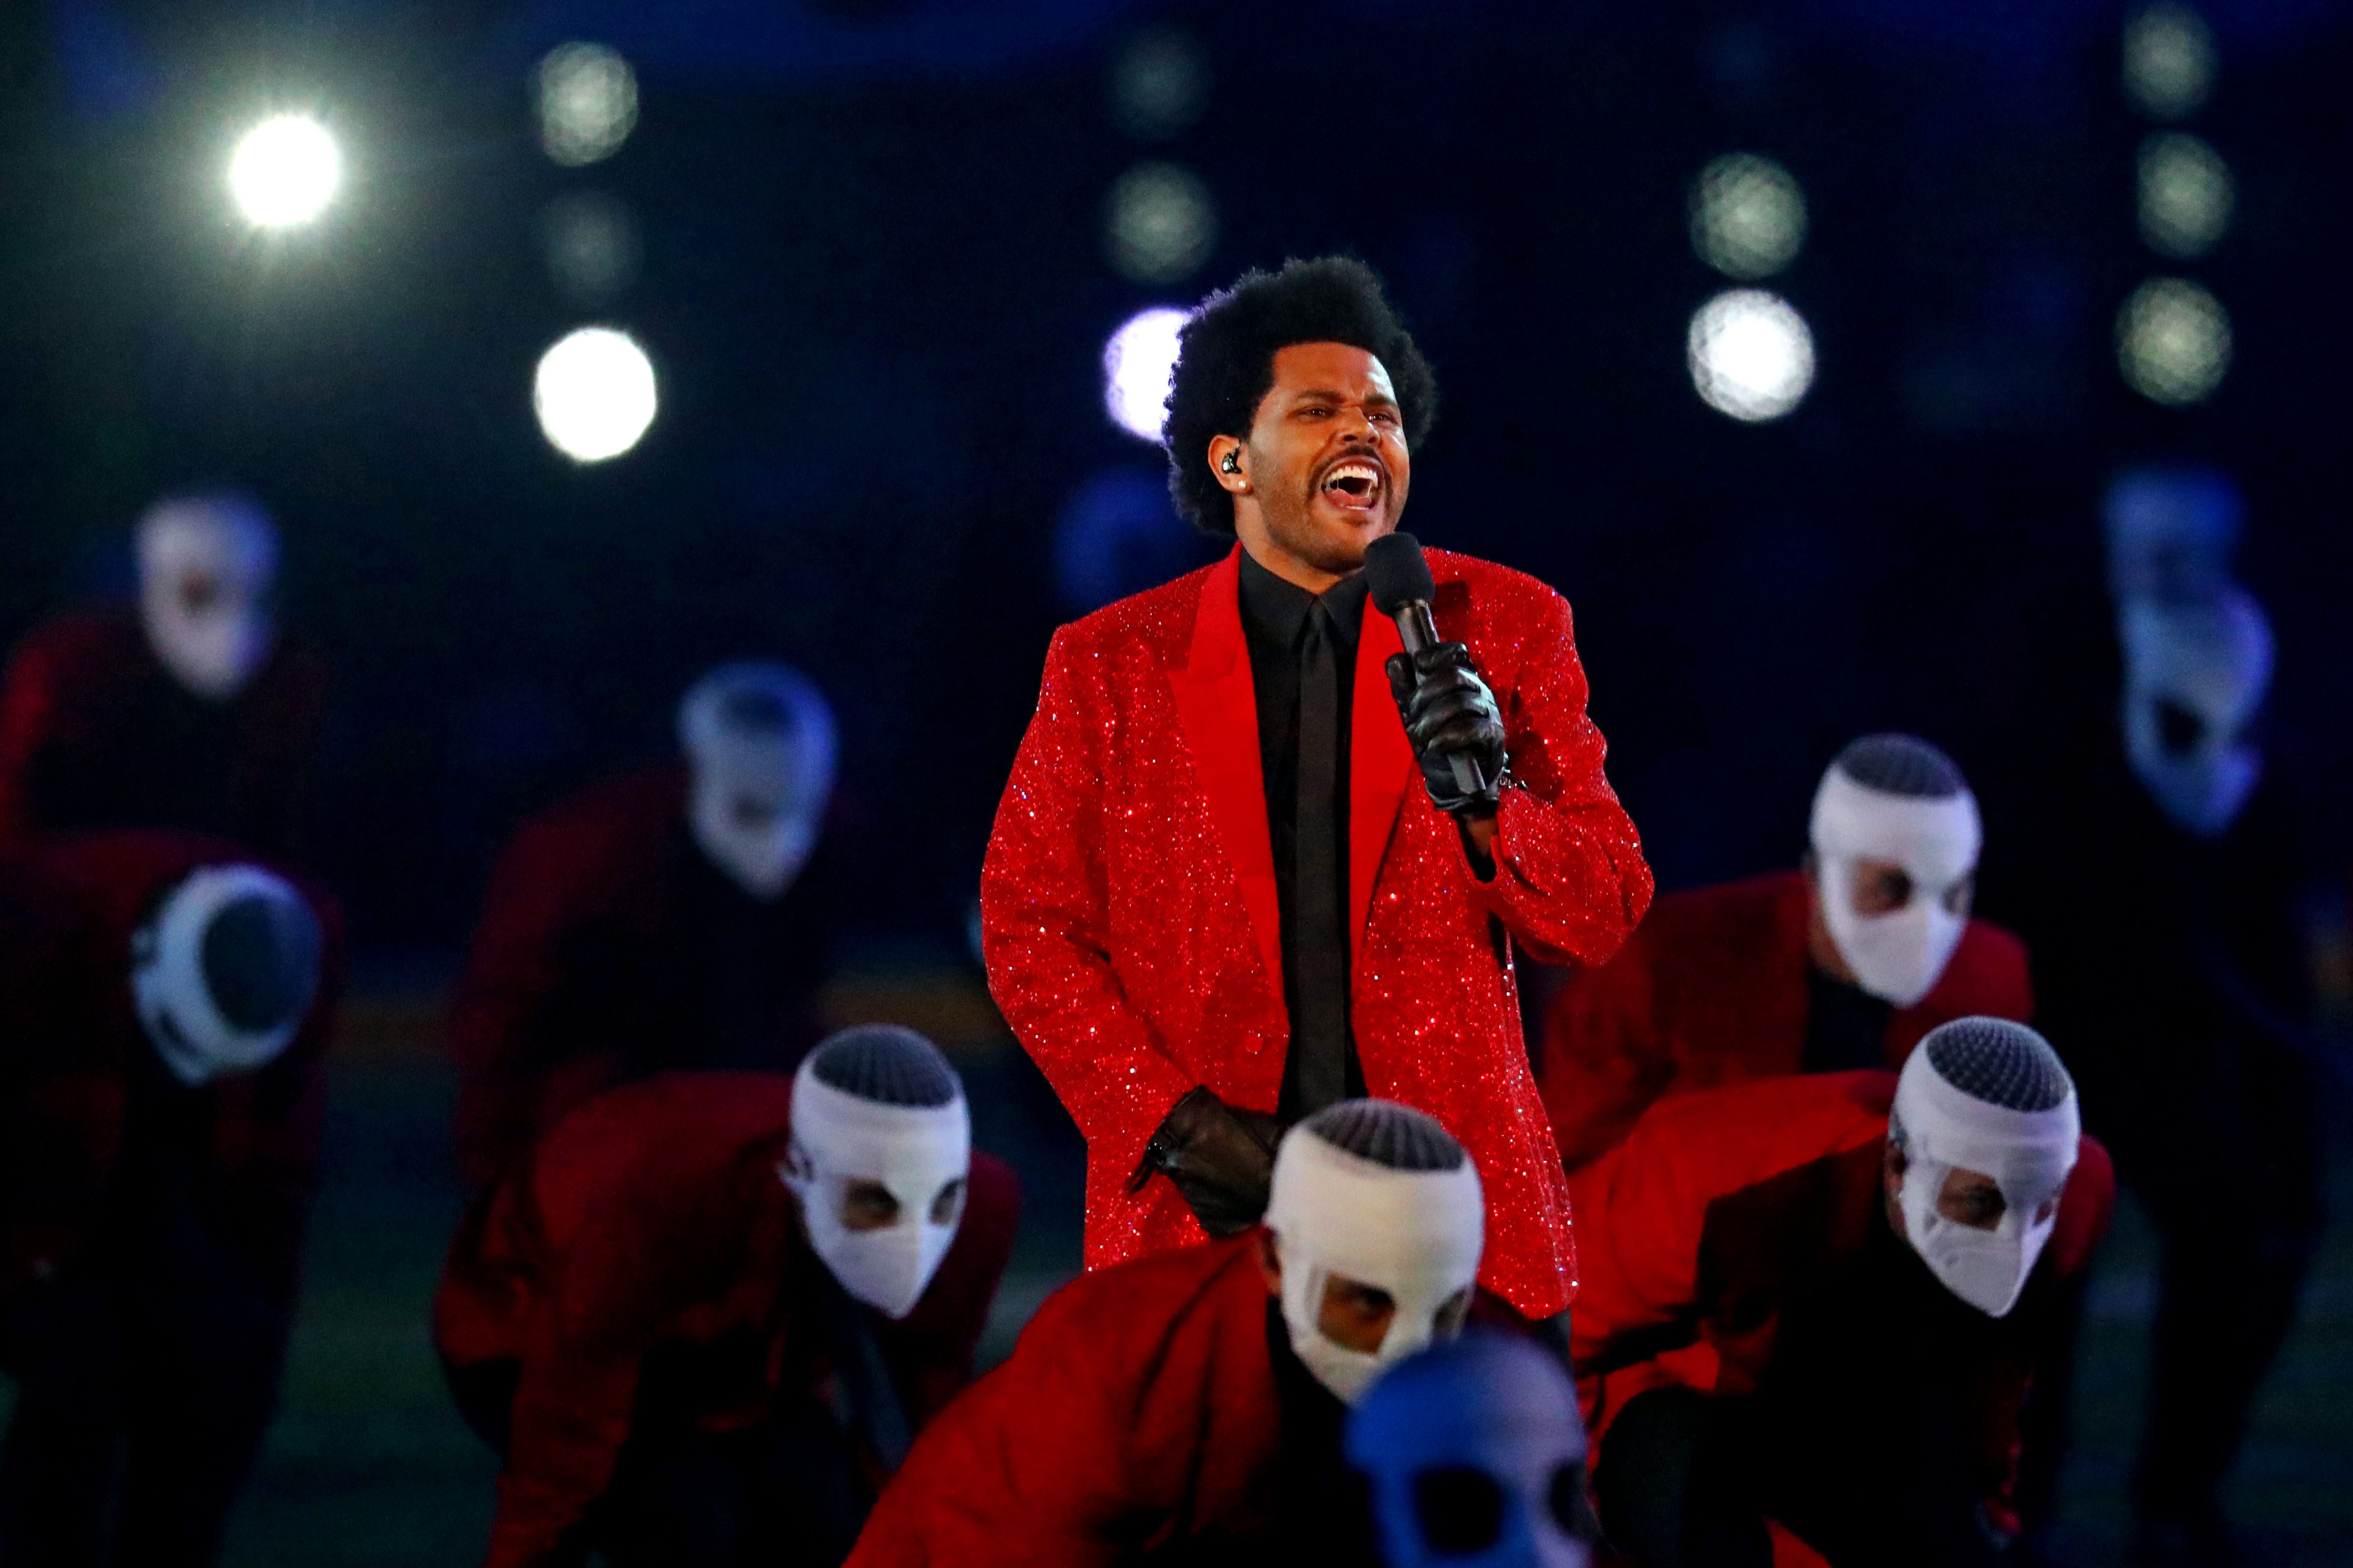 WATCH: The Weeknd brings bright lights, bandaged dancers to Super Bowl